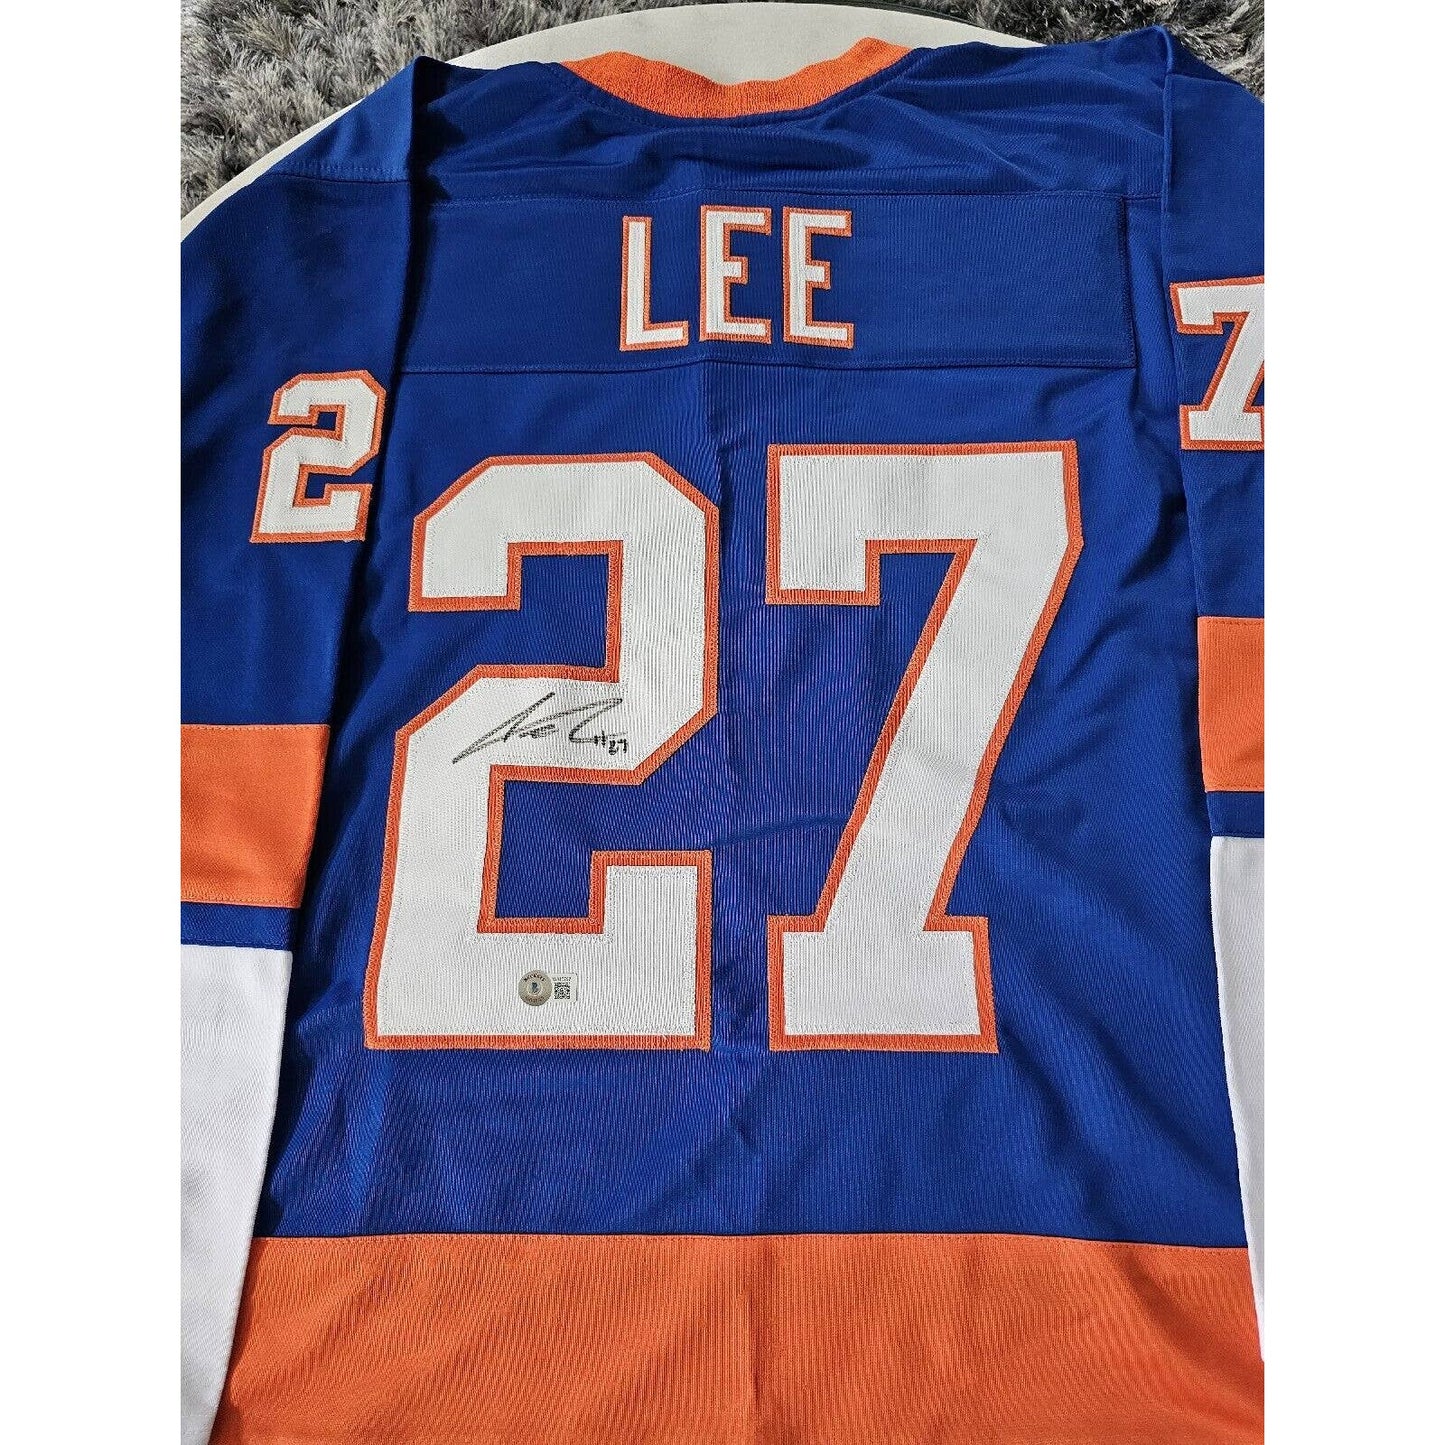 Anders Lee Autographed/Signed Jersey Beckett Sticker New York Islanders